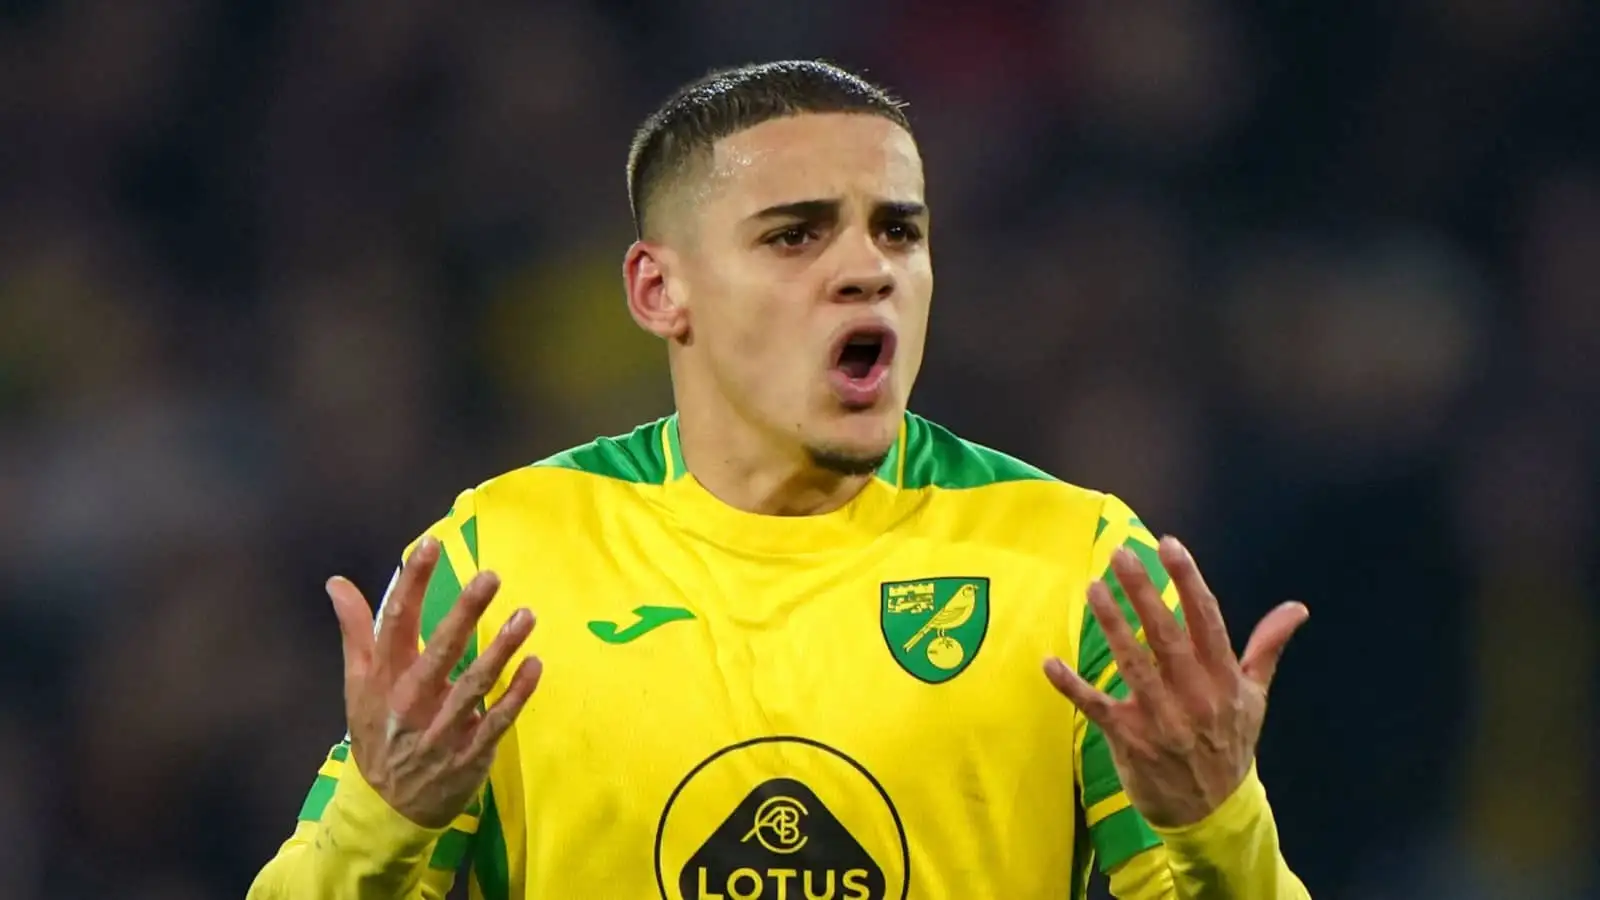 Norwich right-back Max Aarons